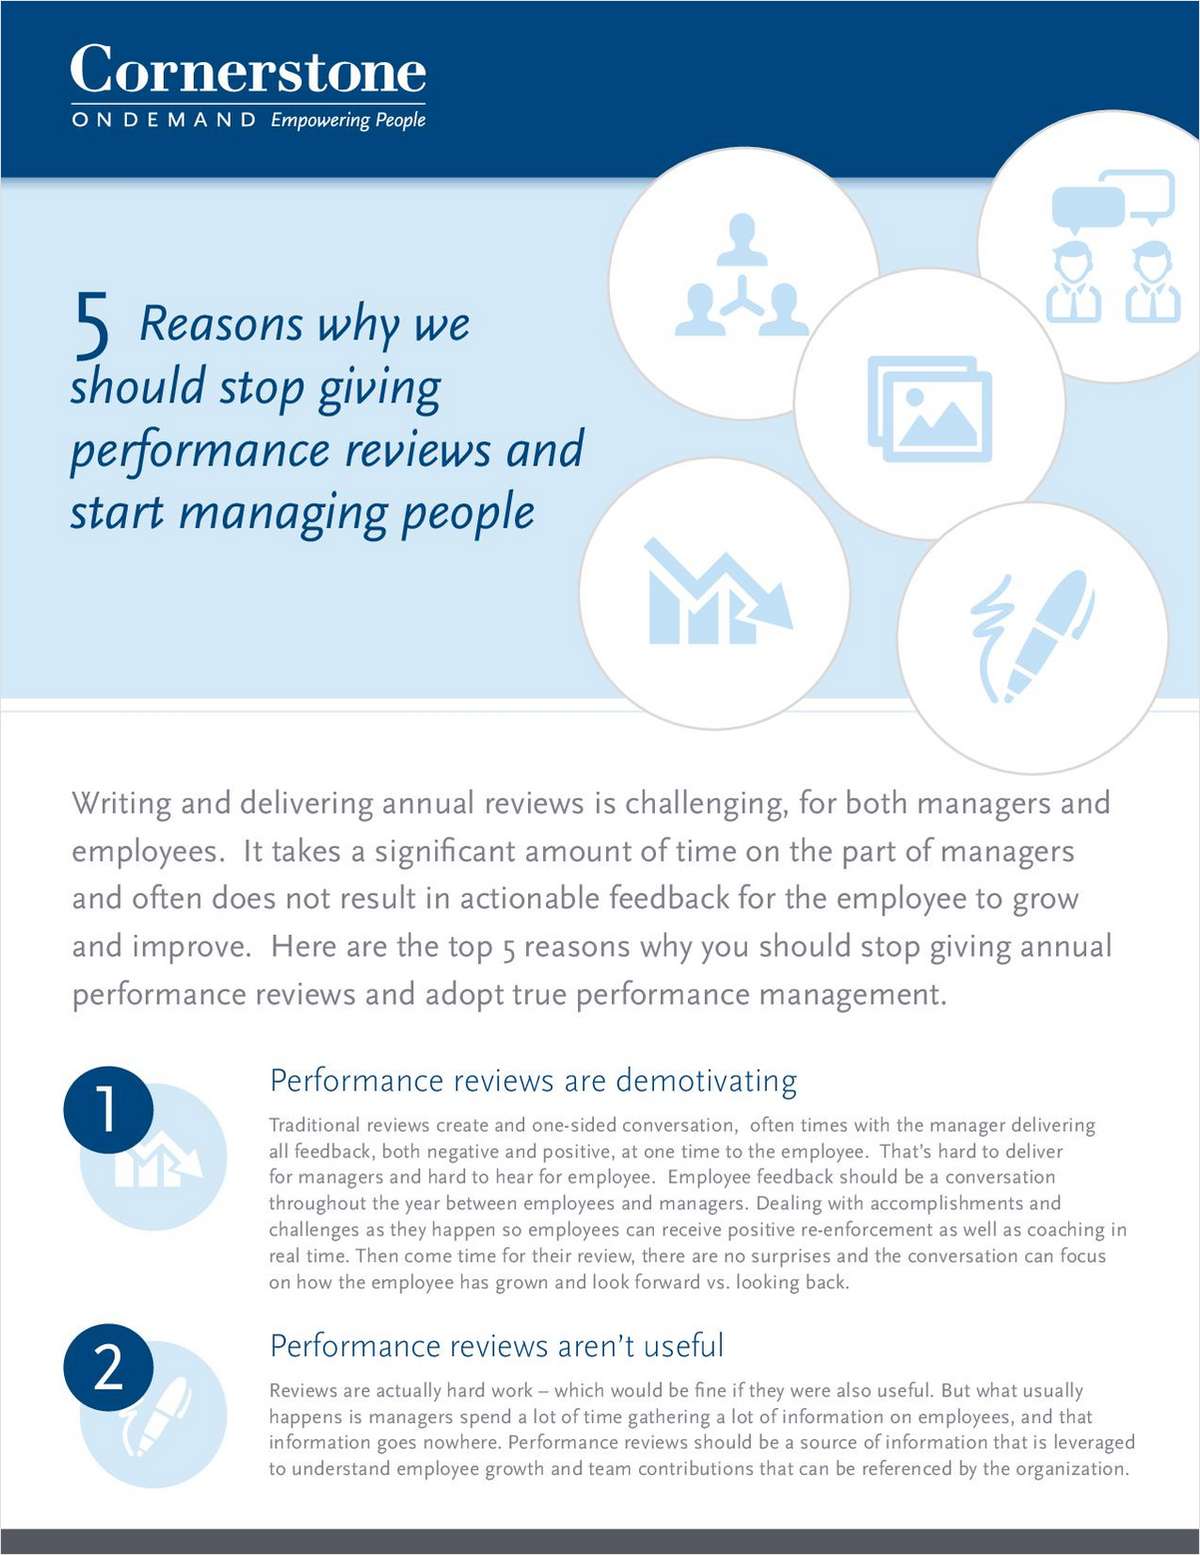 5 Reasons You Should Stop Giving Performance Reviews